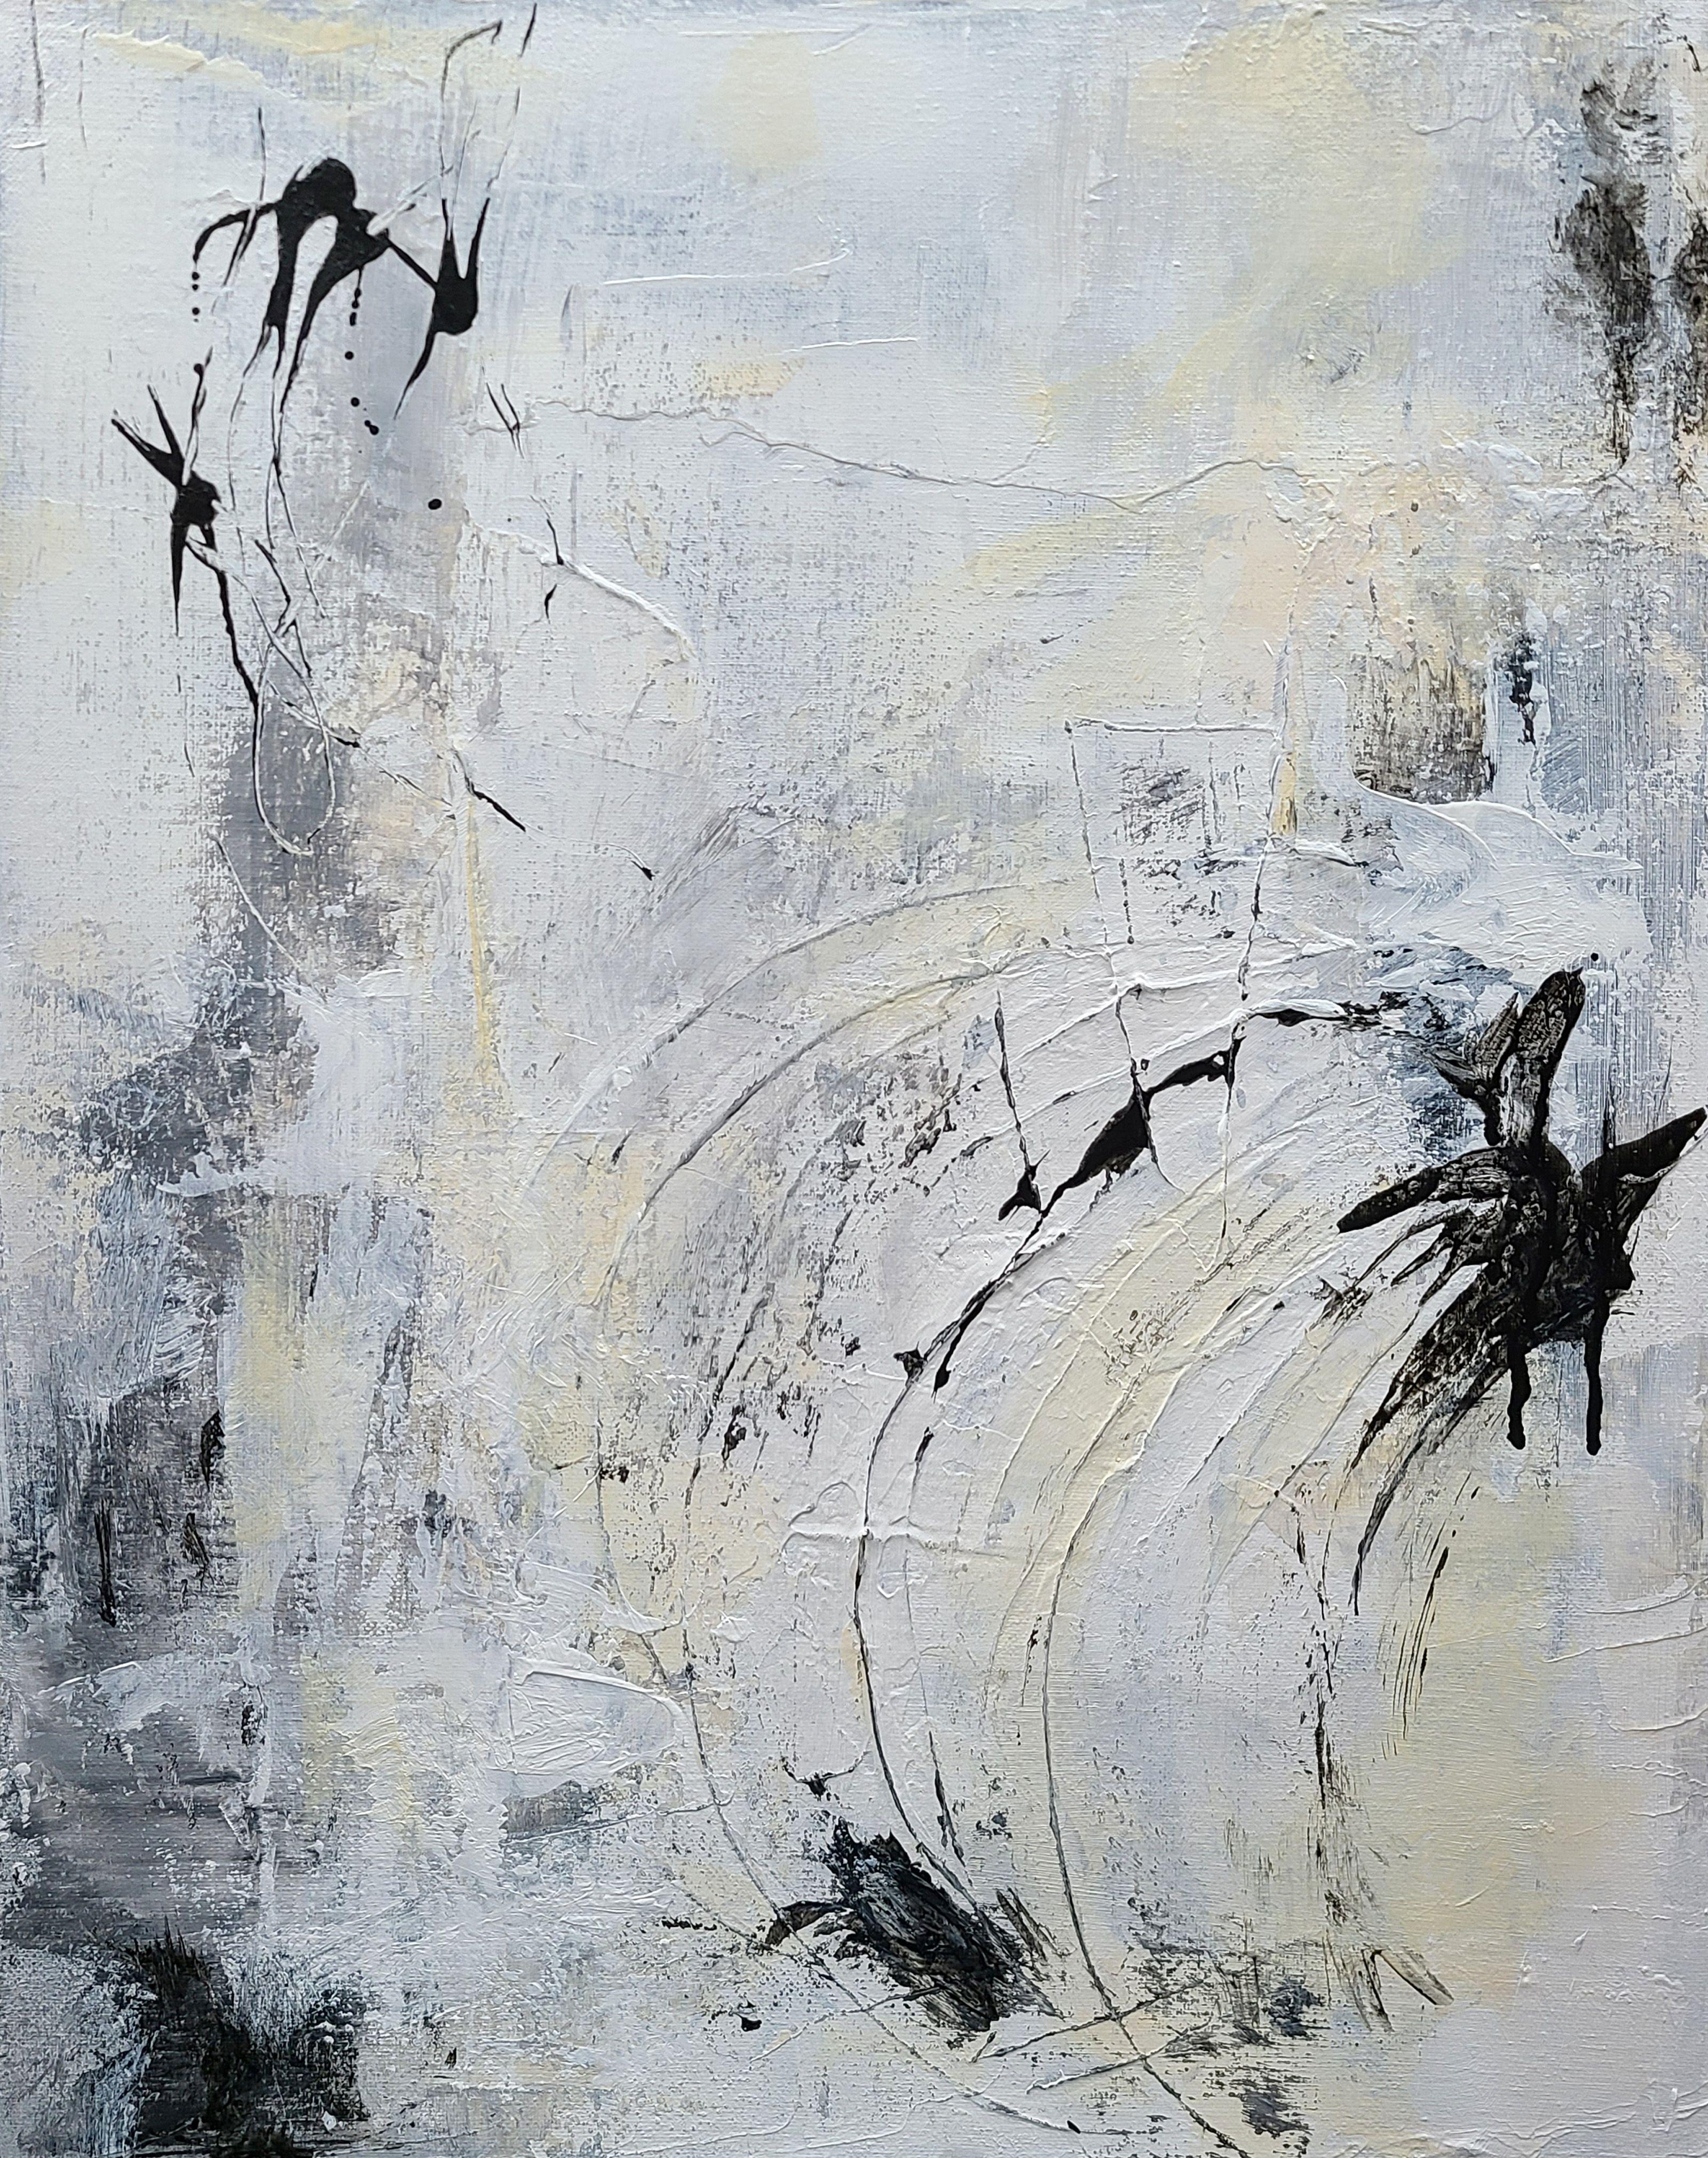 FINAL OPUS is an original abstract textured painting. Created with acrylics and mediums on gallery-wrapped, stretched canvas. Sides (1.5") finished in black. Ready to hang. Neutral colors: White, black, greys, cream/off white. Some surface texture.